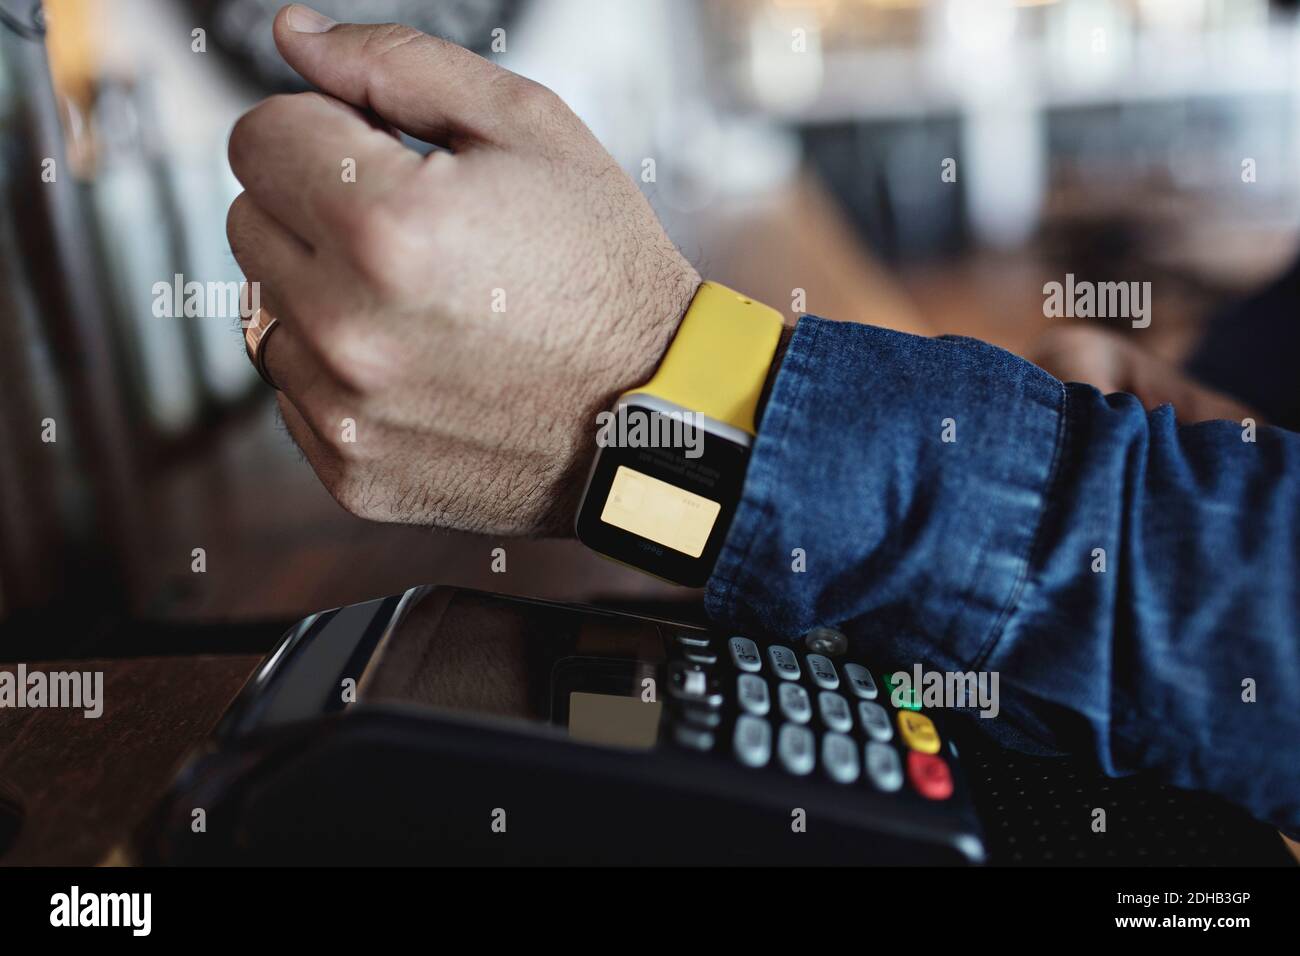 Cropped image of customer doing contactless payment through smart watch at bar counter Stock Photo